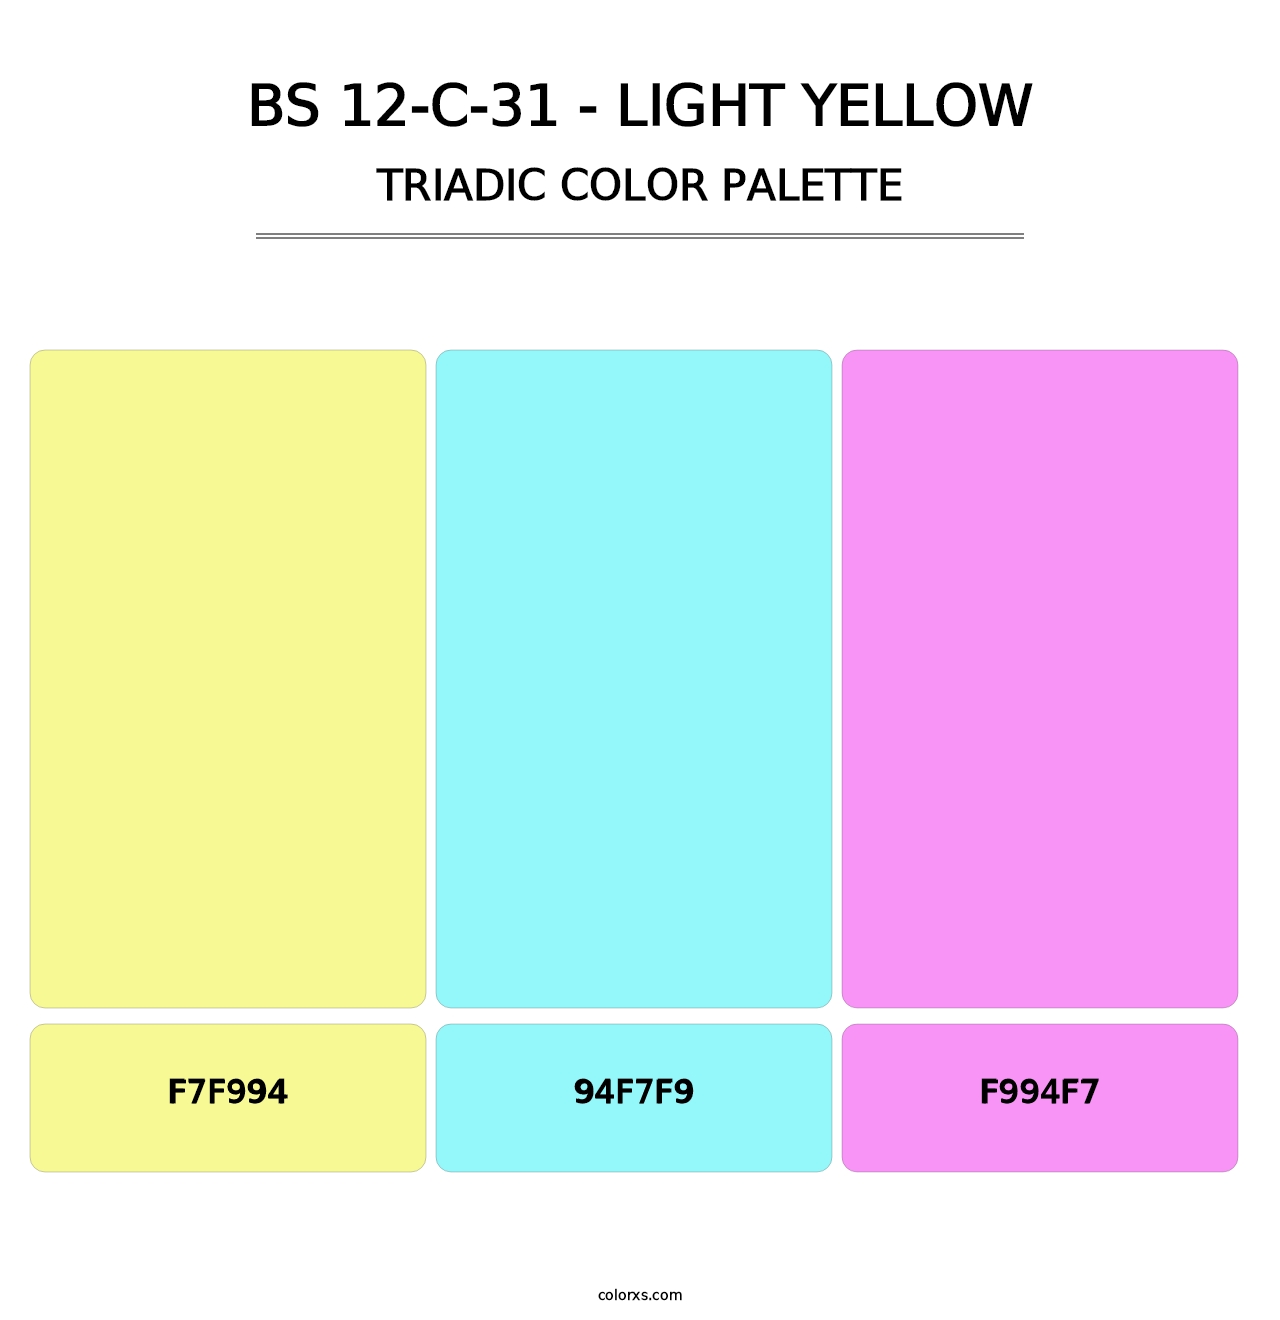 BS 12-C-31 - Light Yellow - Triadic Color Palette